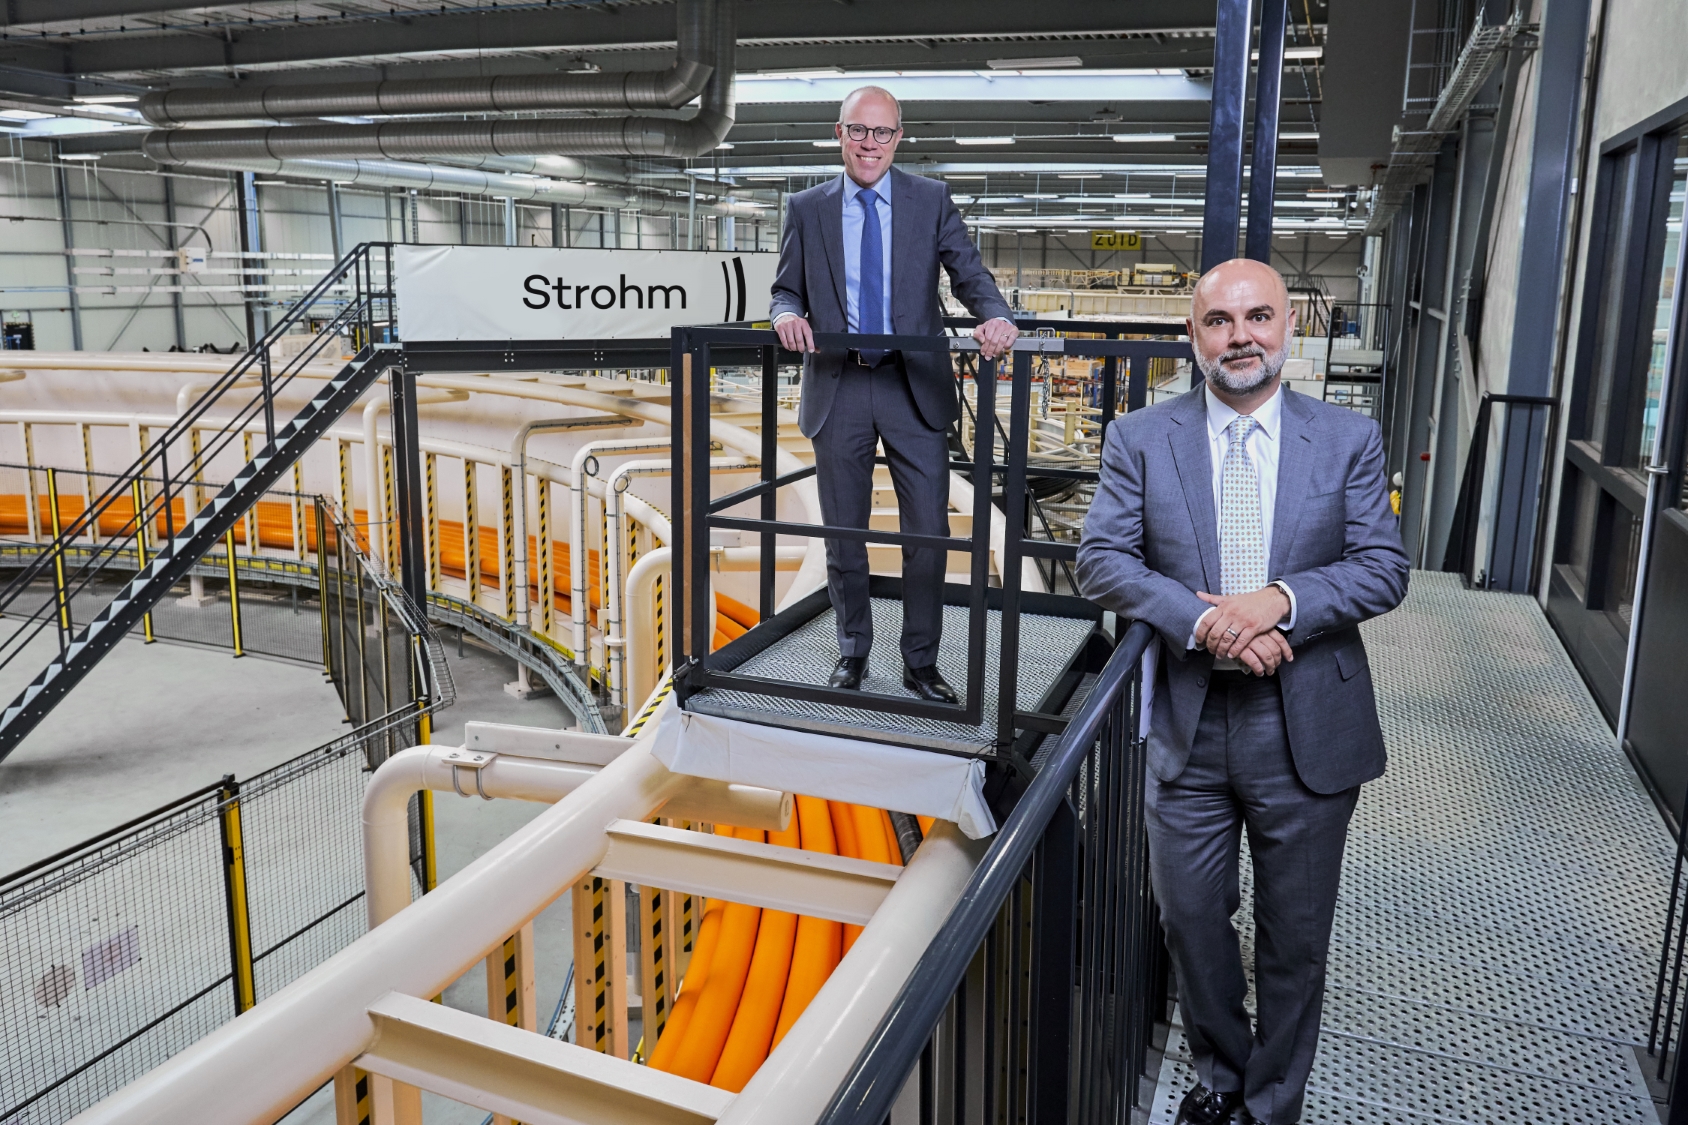 Strohm (left to right) - CCO Martin van Onna and CEO Oliver Kassam